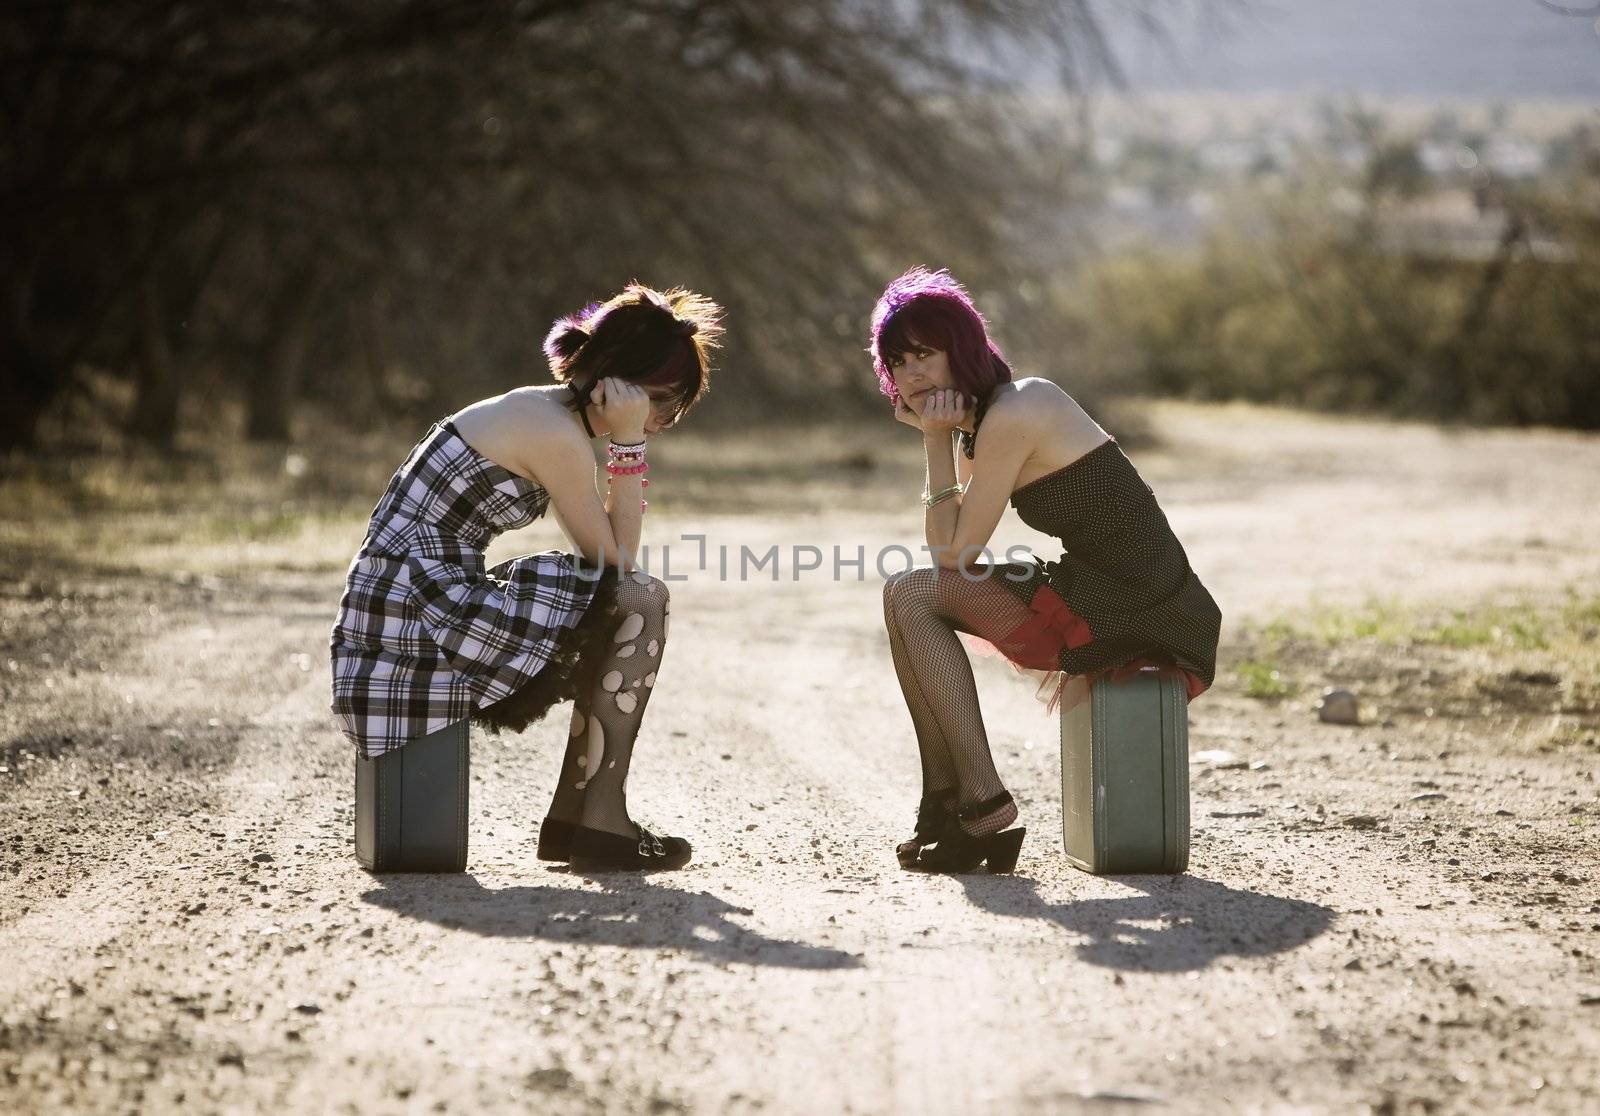 Two punk women sitting on suitcases and waiting on a rural road